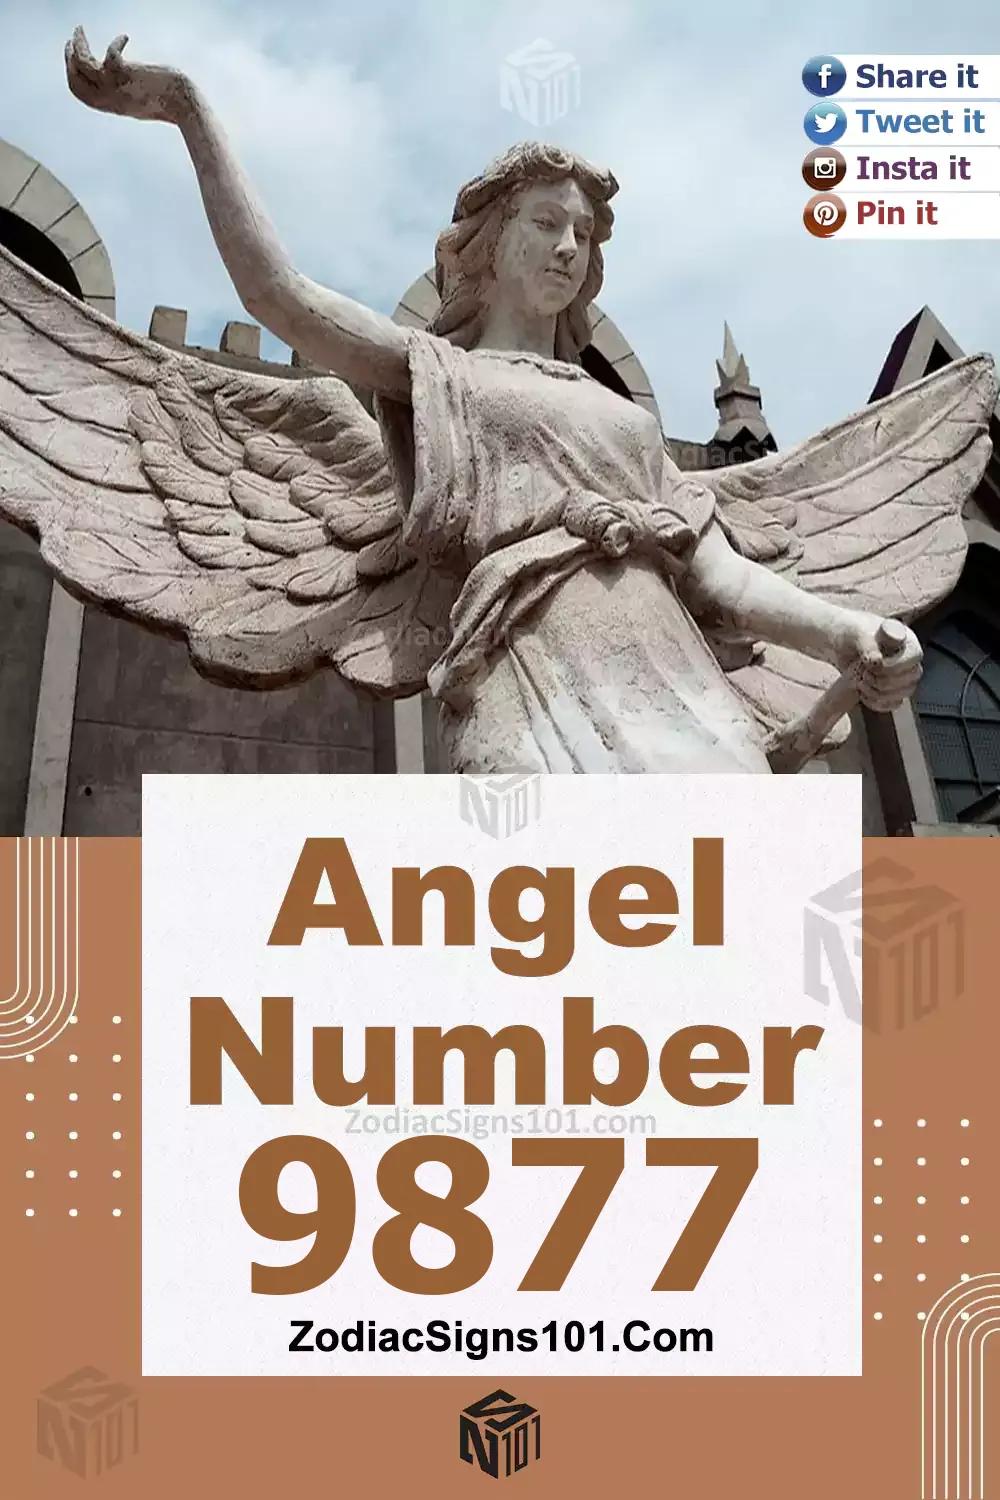 9877 Angel Number Meaning